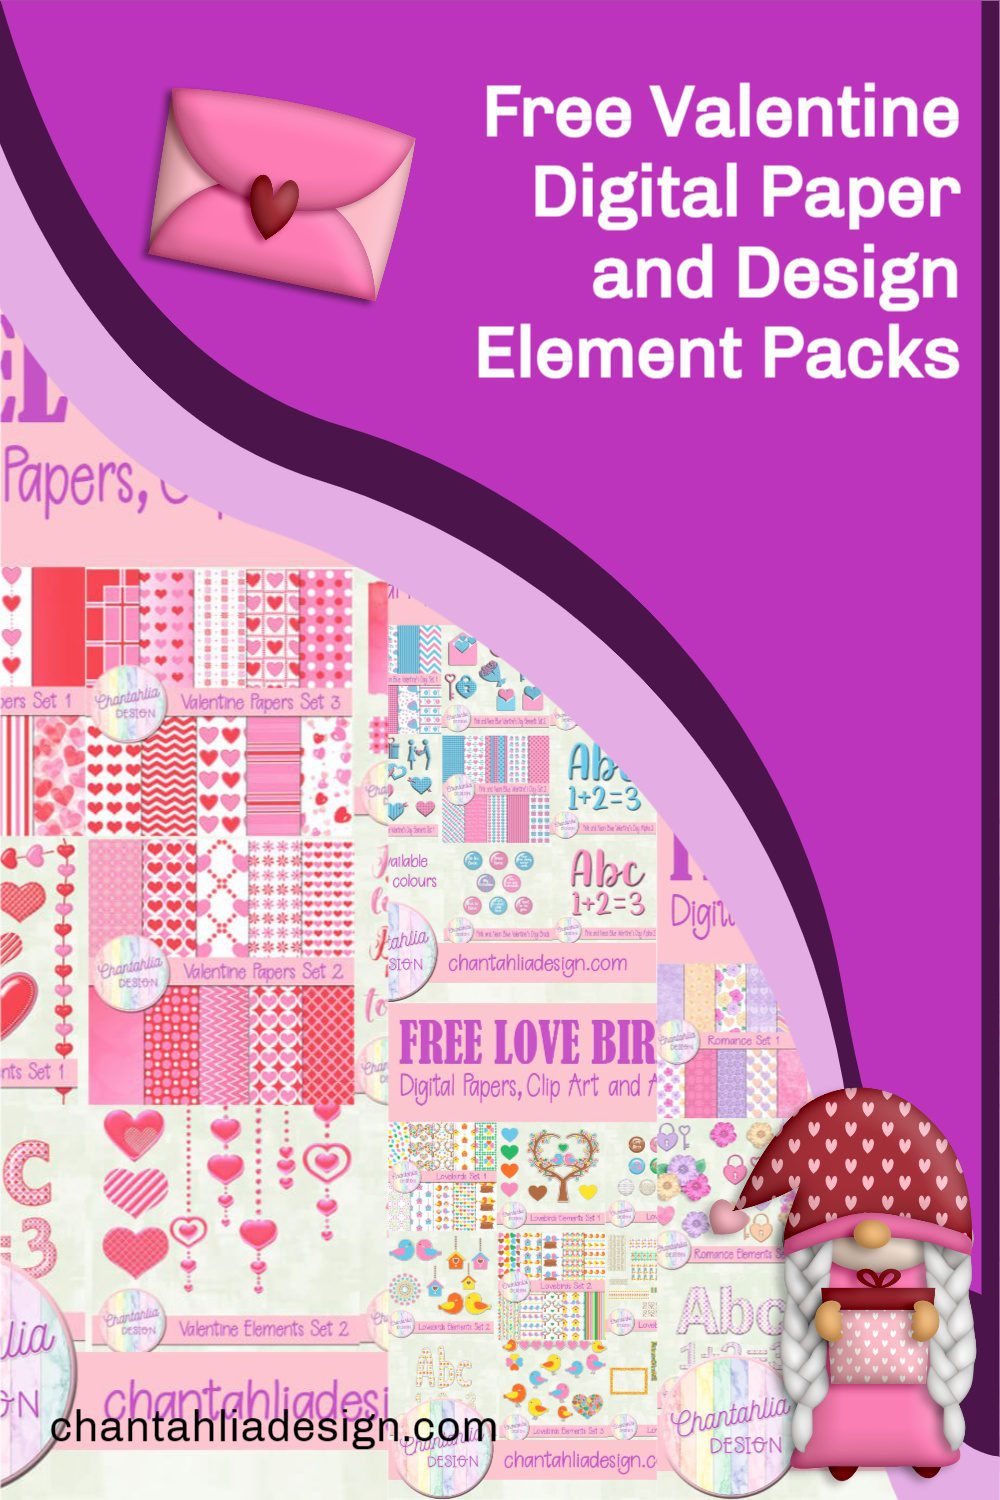 Valentines day pink love element aesthetic romantic background